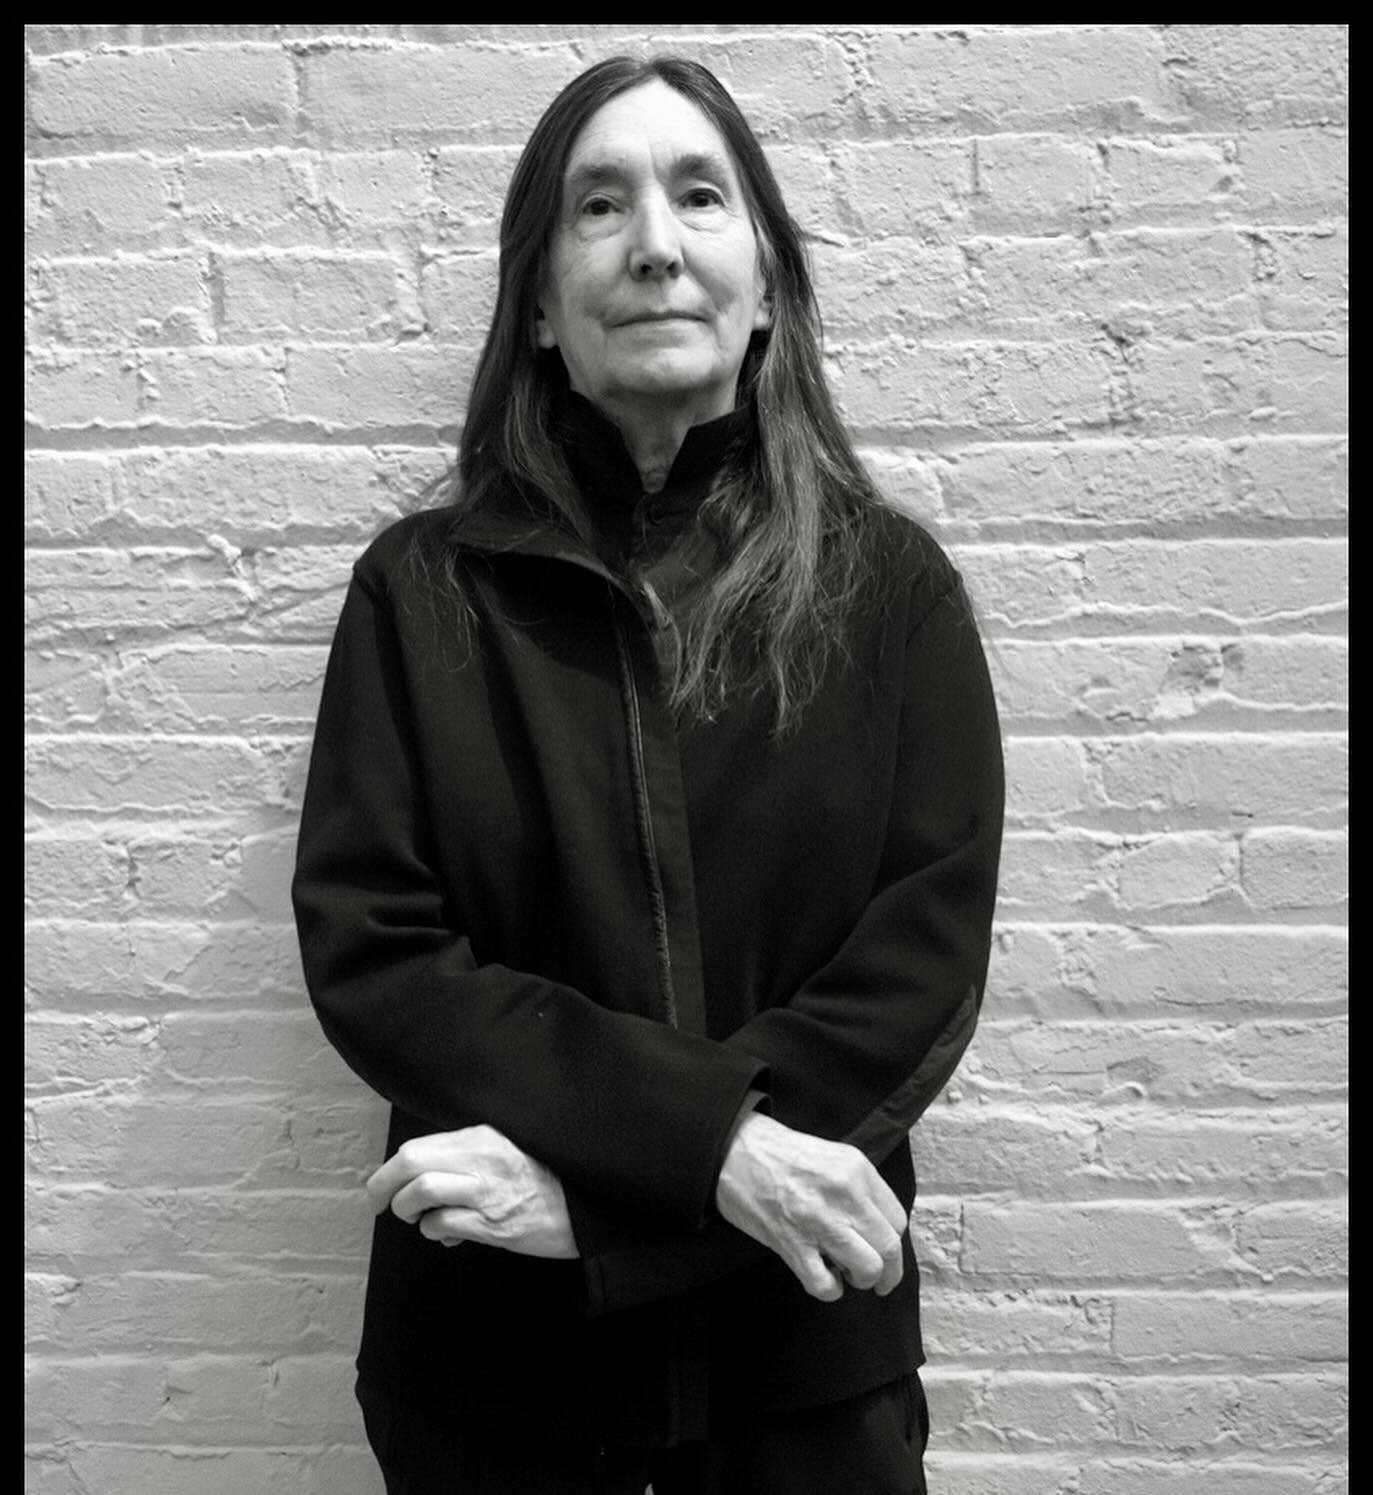 In the women artists&rsquo; series Badasses (Trailblazers) &hellip; During the holiday season what an inspiring talk I attended on #louisebourgeois by #jennyholzer at #hauserwirth in Chelsea on Monday, Dec 18. The discussion came at the close (Dec 23